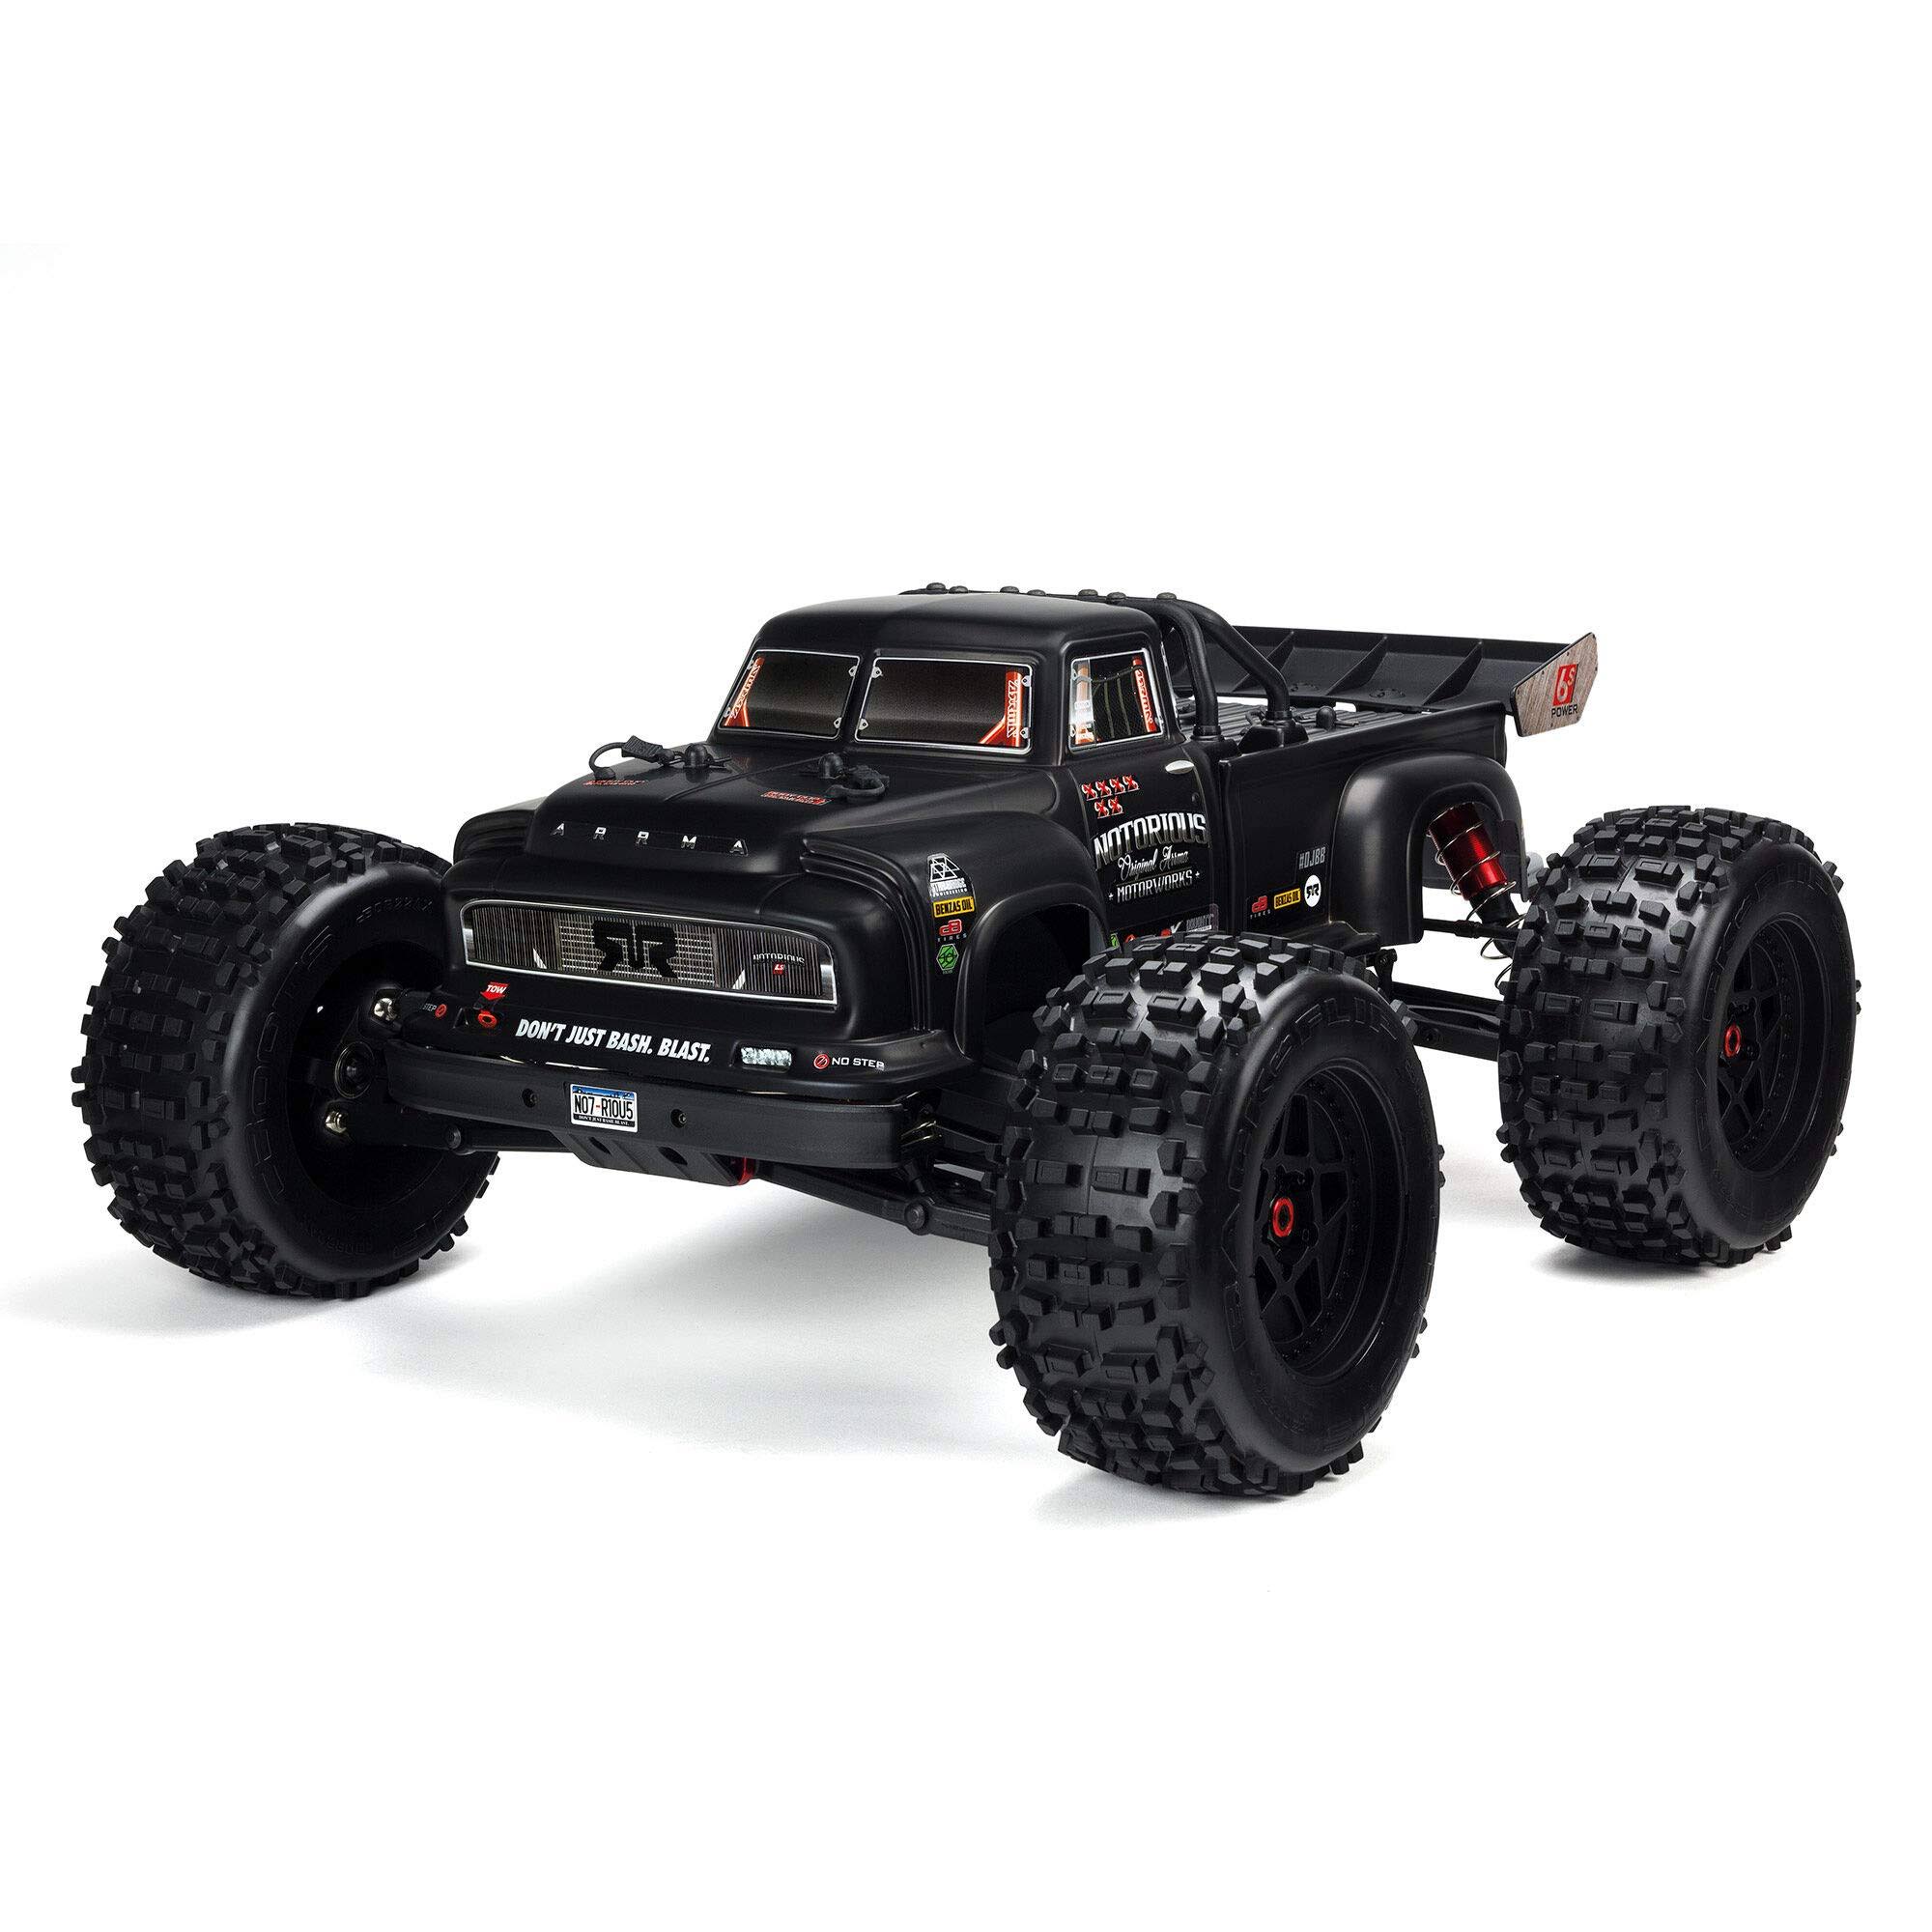 ARRMA 1/8 Notorious 6S V5 4WD BLX Stunt RC Truck with Spektrum Firma RTR (Transmitter and Receiver Included, Batteries and Charger Required), Black,